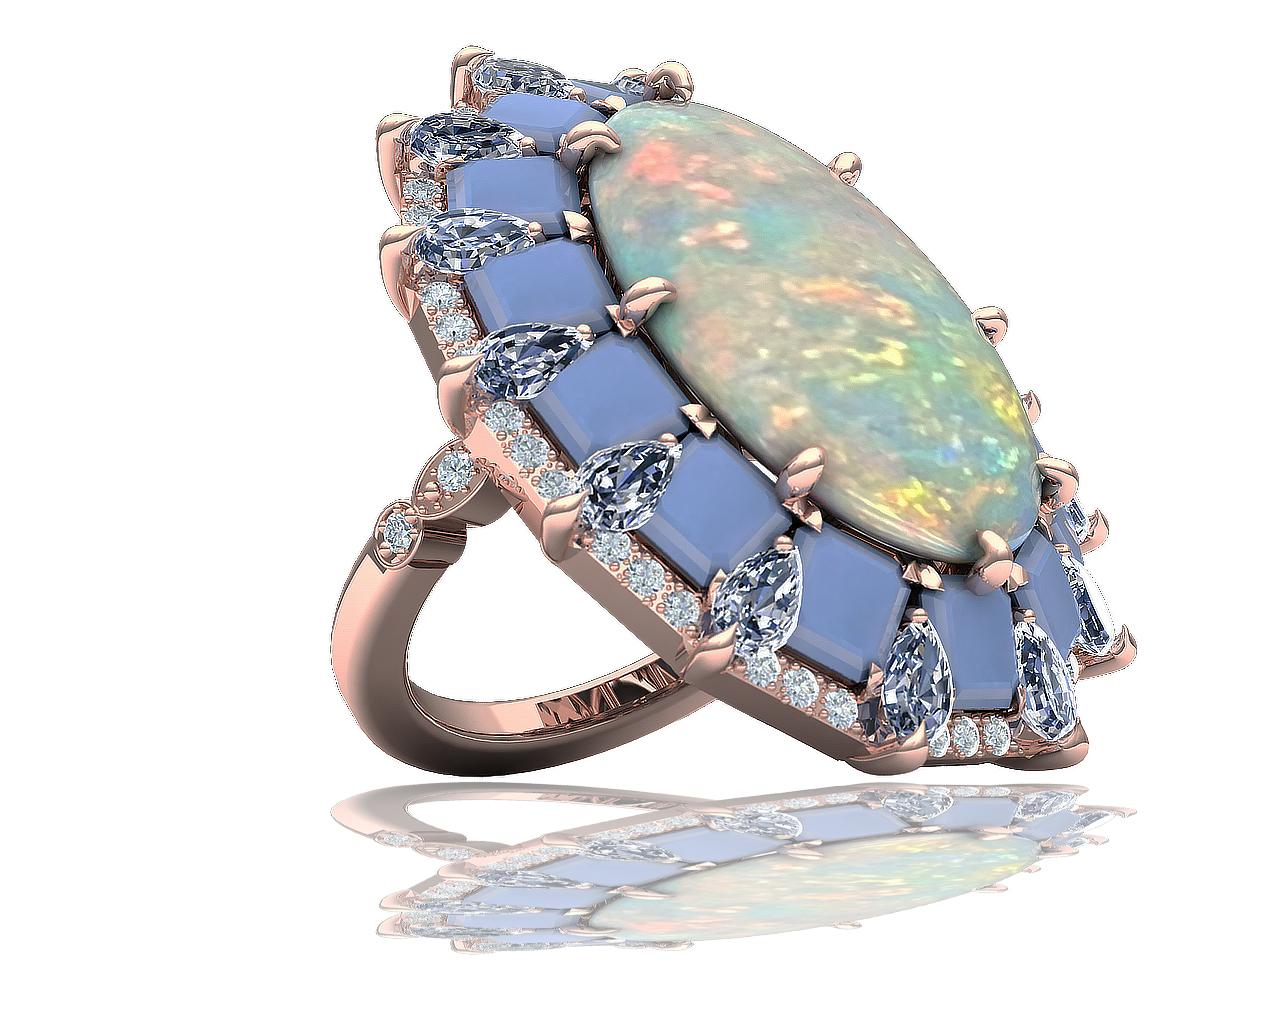 A true measure of creativity with color hue combinations.  This opal diamond cocktail ring has a truly stunning center stone at just over 5 carats and a stunning matrix.  This Australian opal has tones of green to orange with light ridges of pink